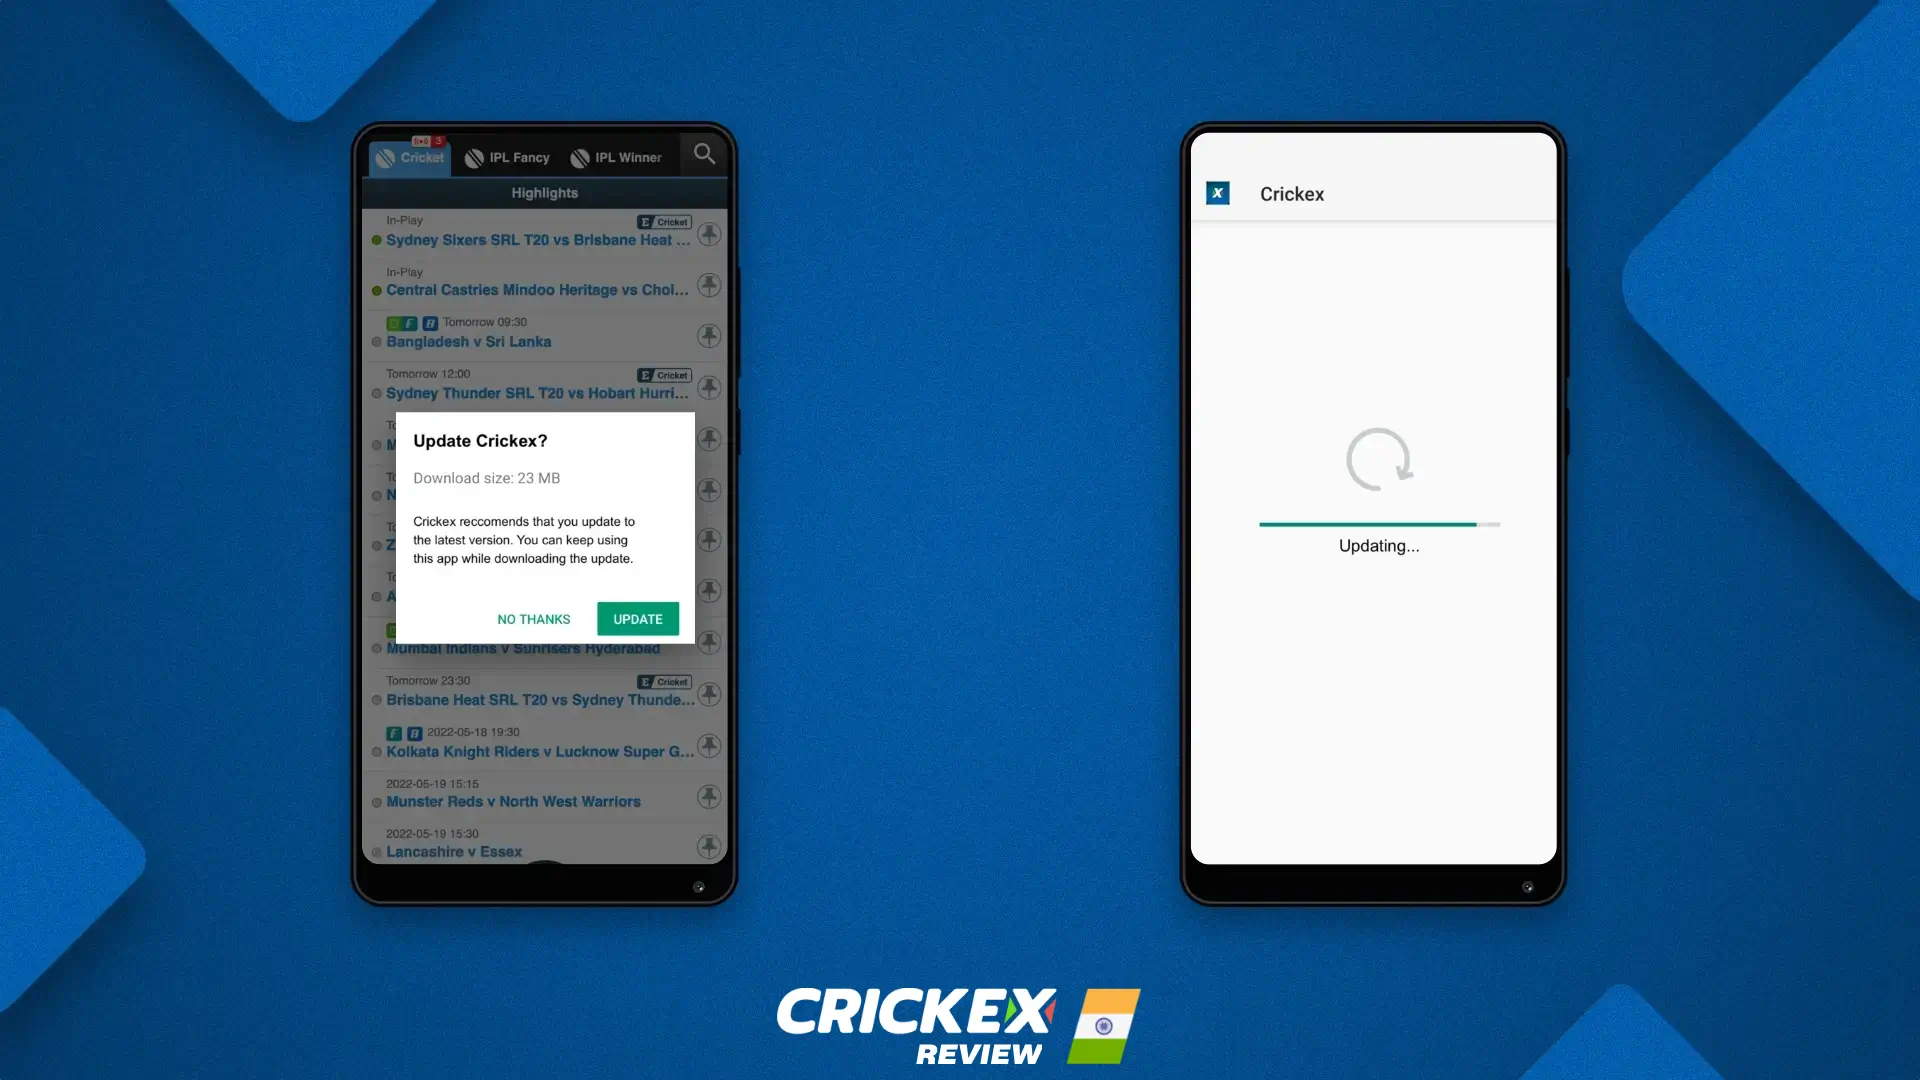 Detailed information on how to update the crickex app to the latest version